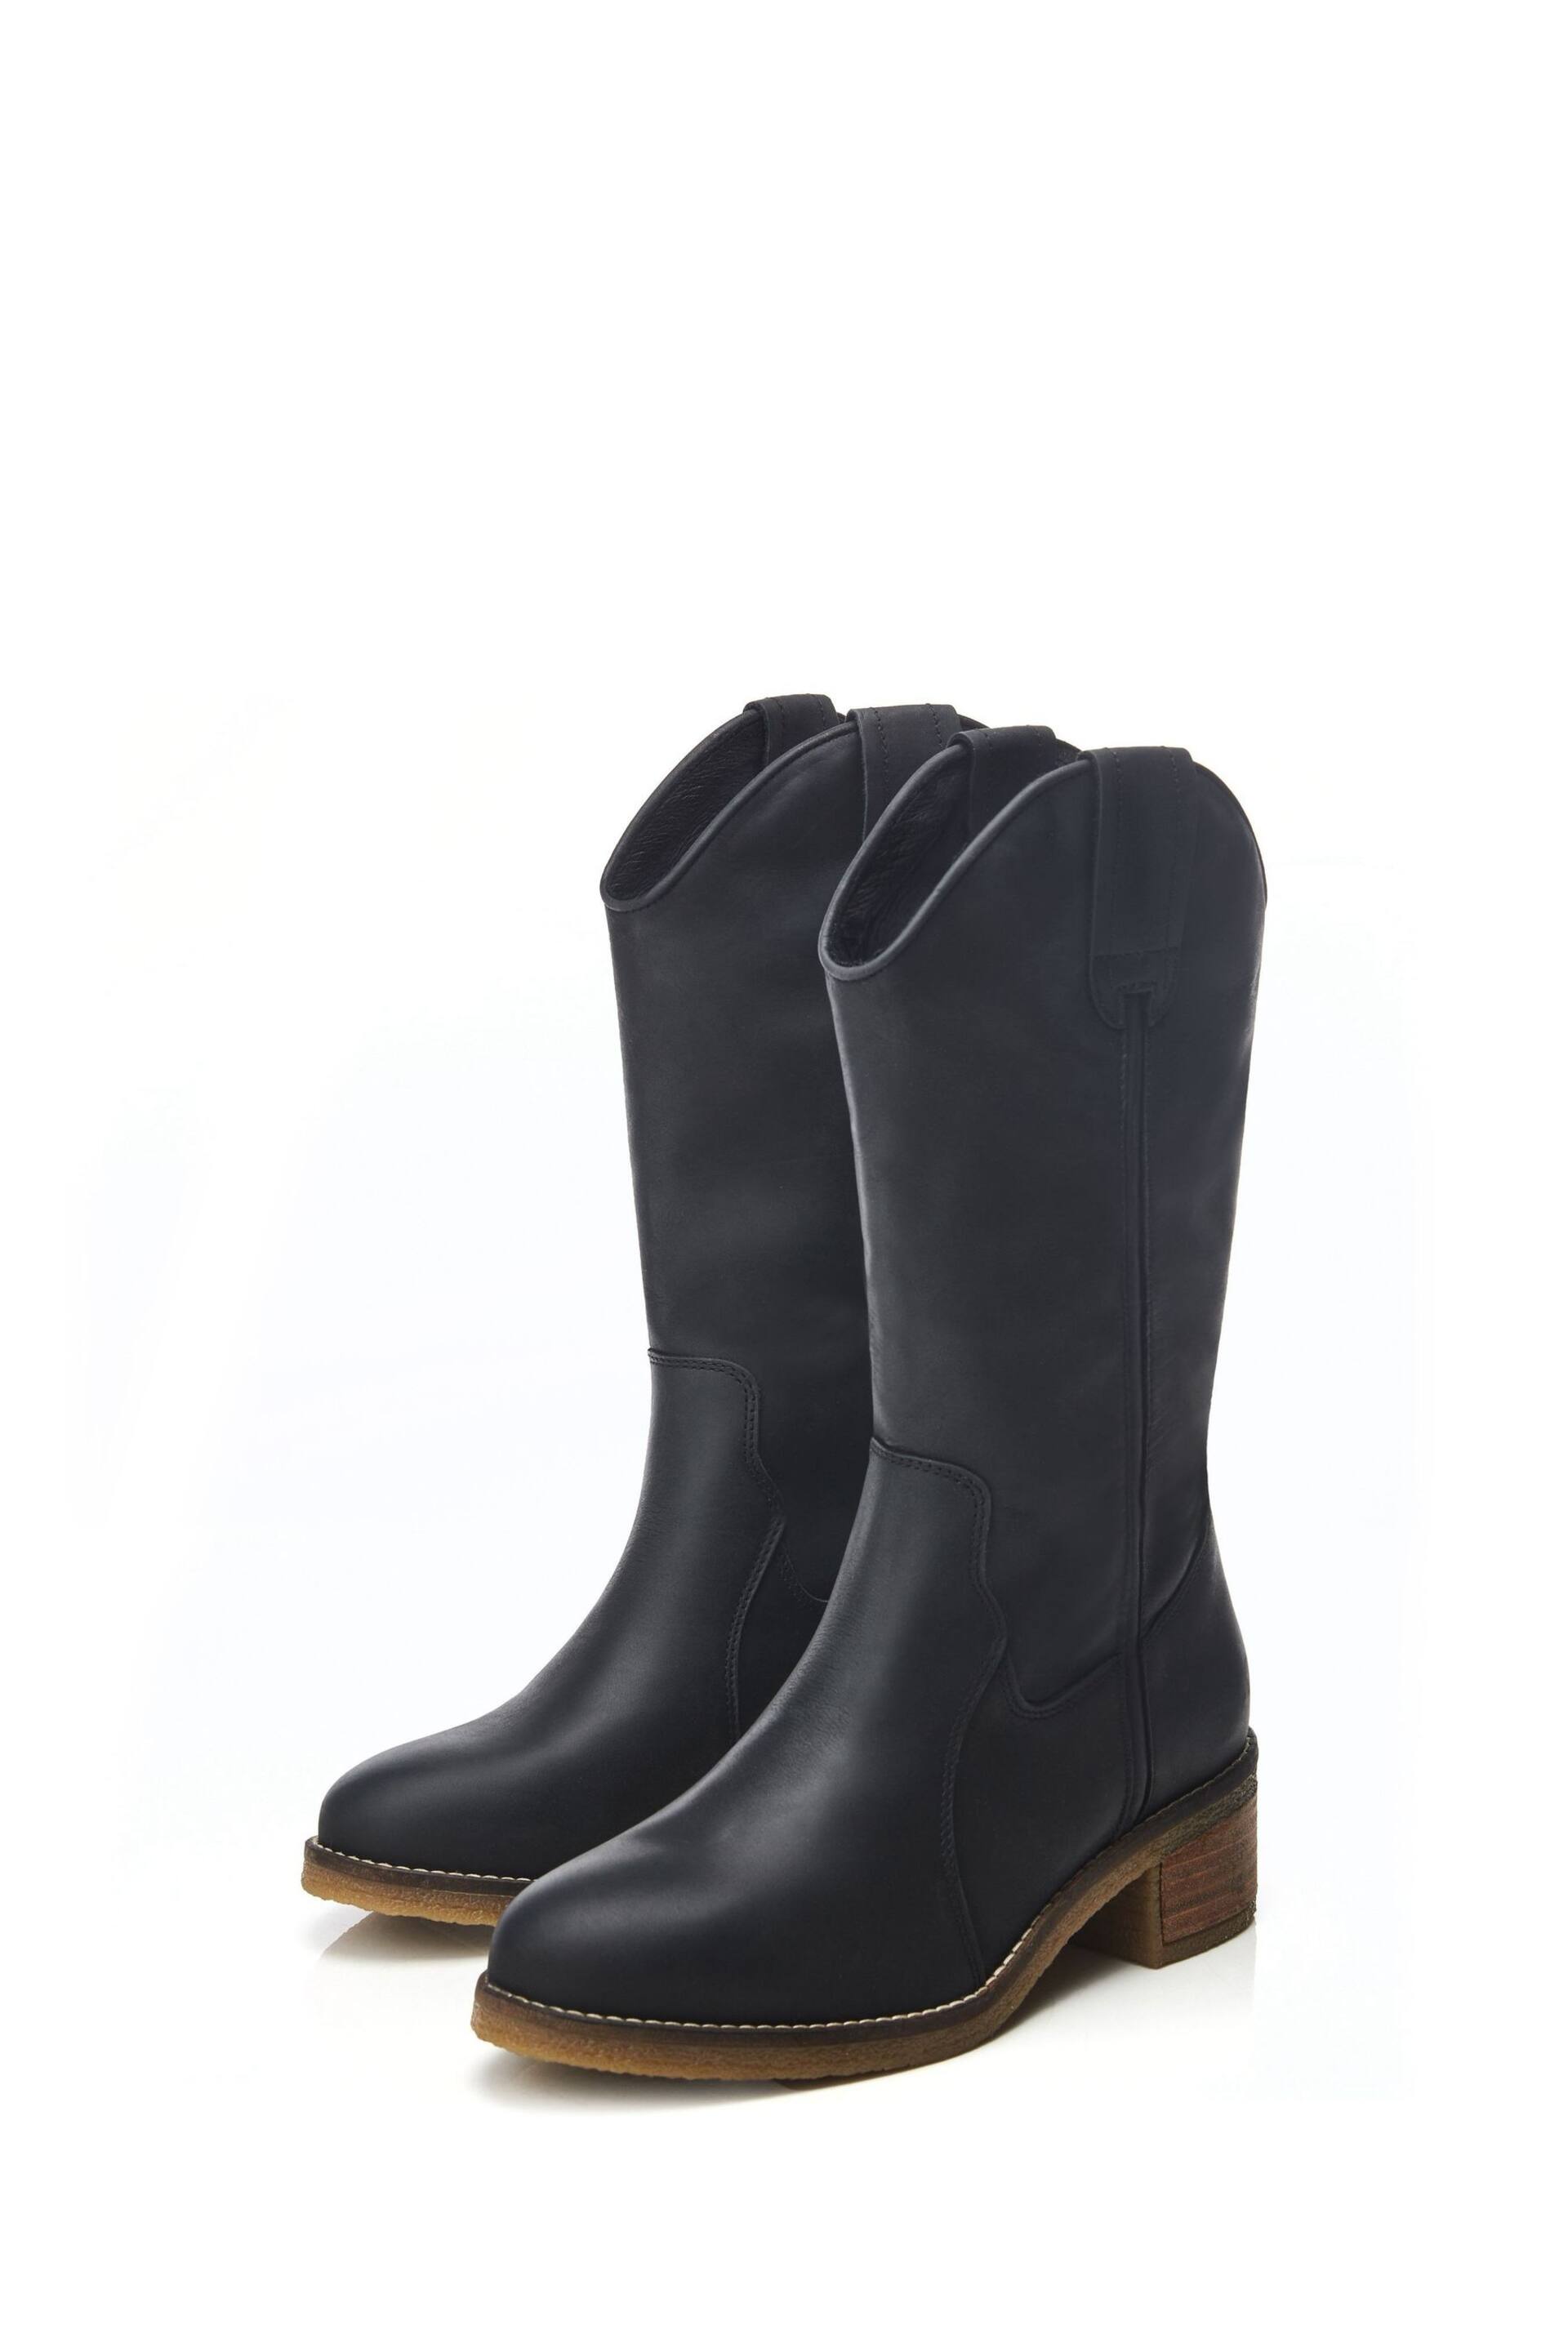 Moda in Pelle Dana Crepe Sole Long Western Natural Boots - Image 2 of 4